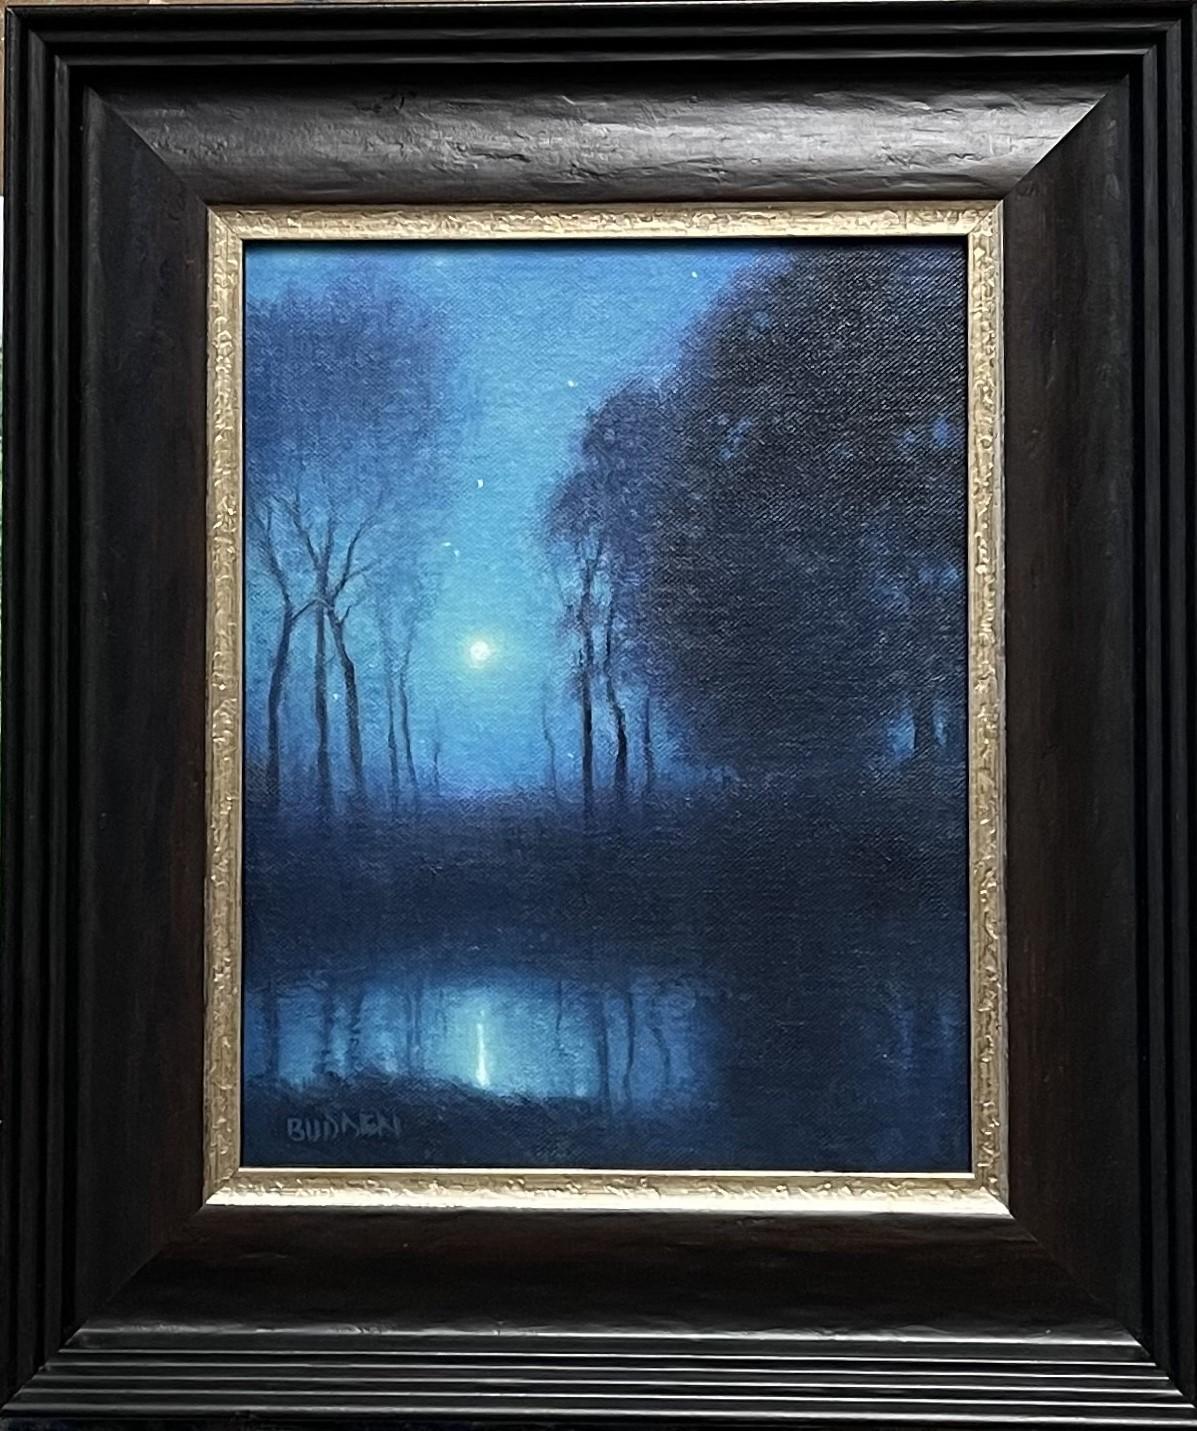 Evening Moonrise Study
oil/panel
10 x 8 unframed  14.38 x 12.38 framed.
An oil painting on canvas by award winning contemporary artist Michael Budden that showcases a romantic moonlit landscape from a scene near my studio created in an